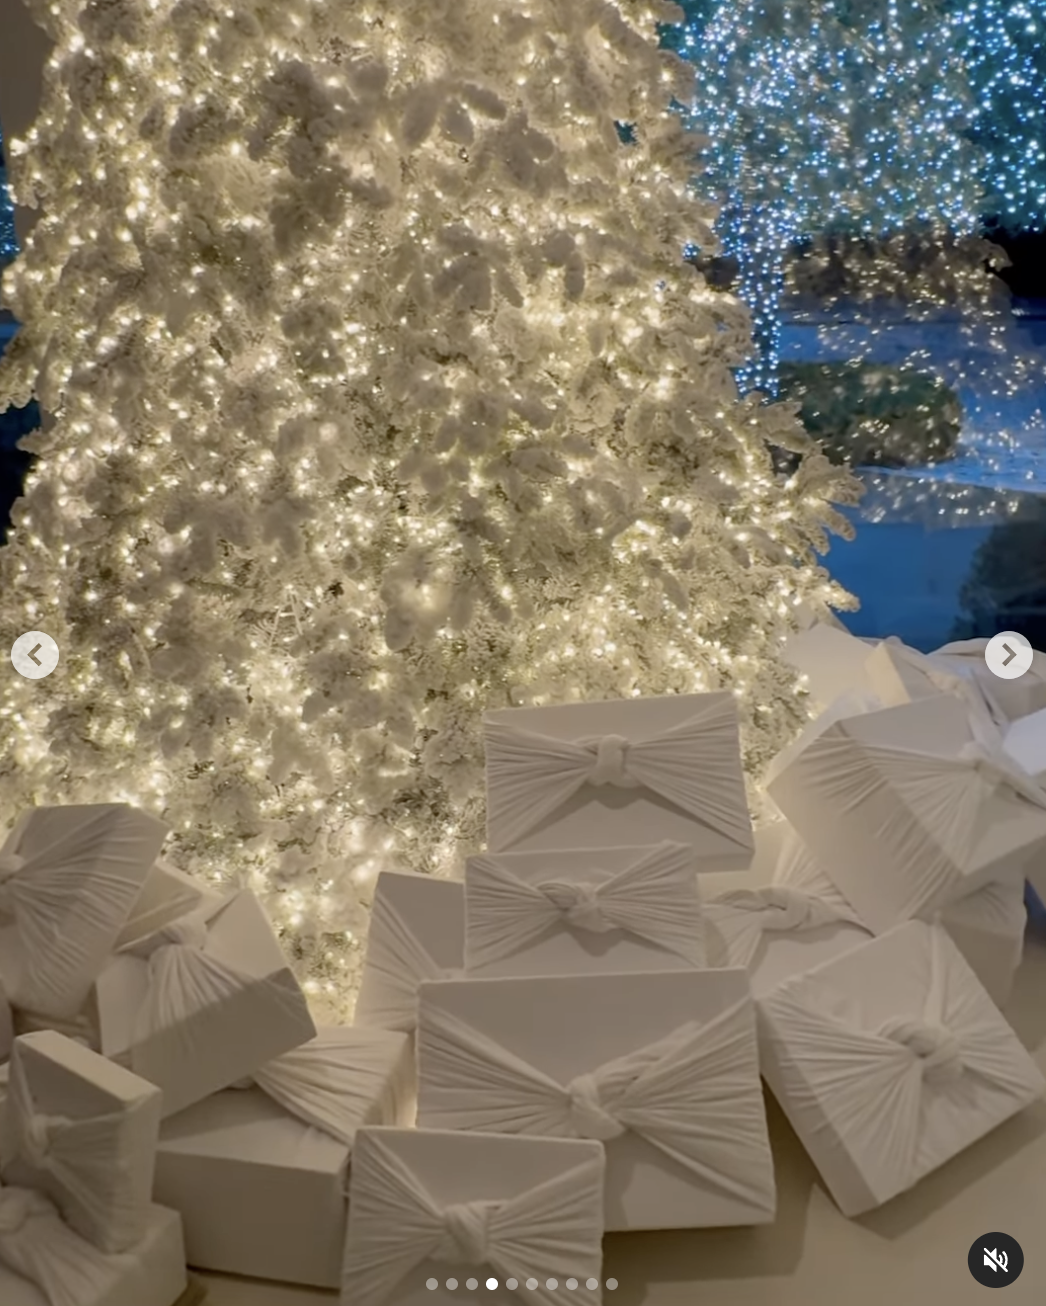 Presents under the tree and wrapped in white cotton fabric